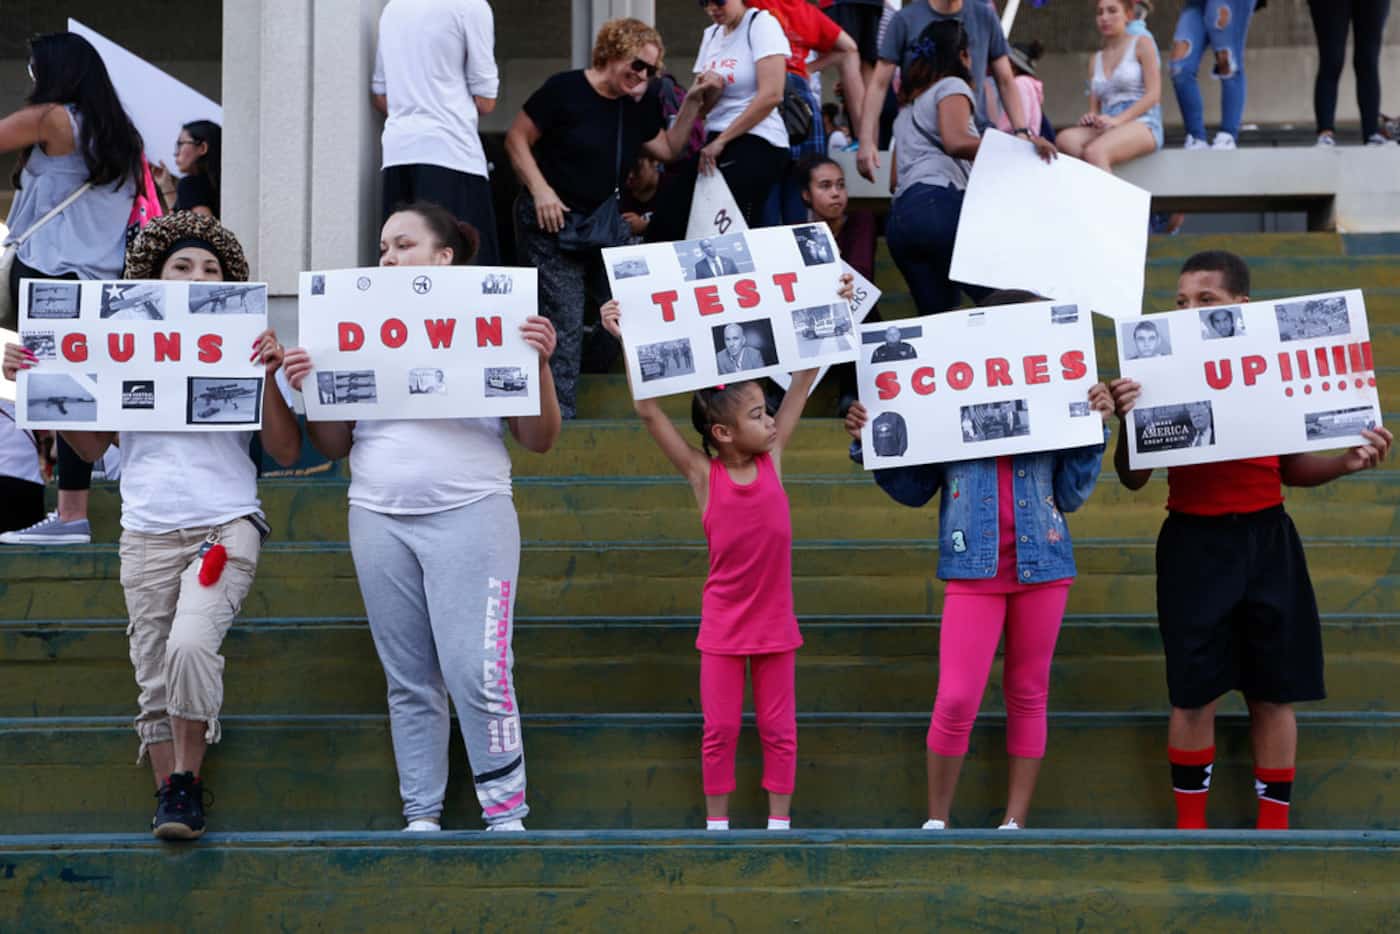 A group of people hold signs that read 'Guns Down Test Scores UP' during a protest against...